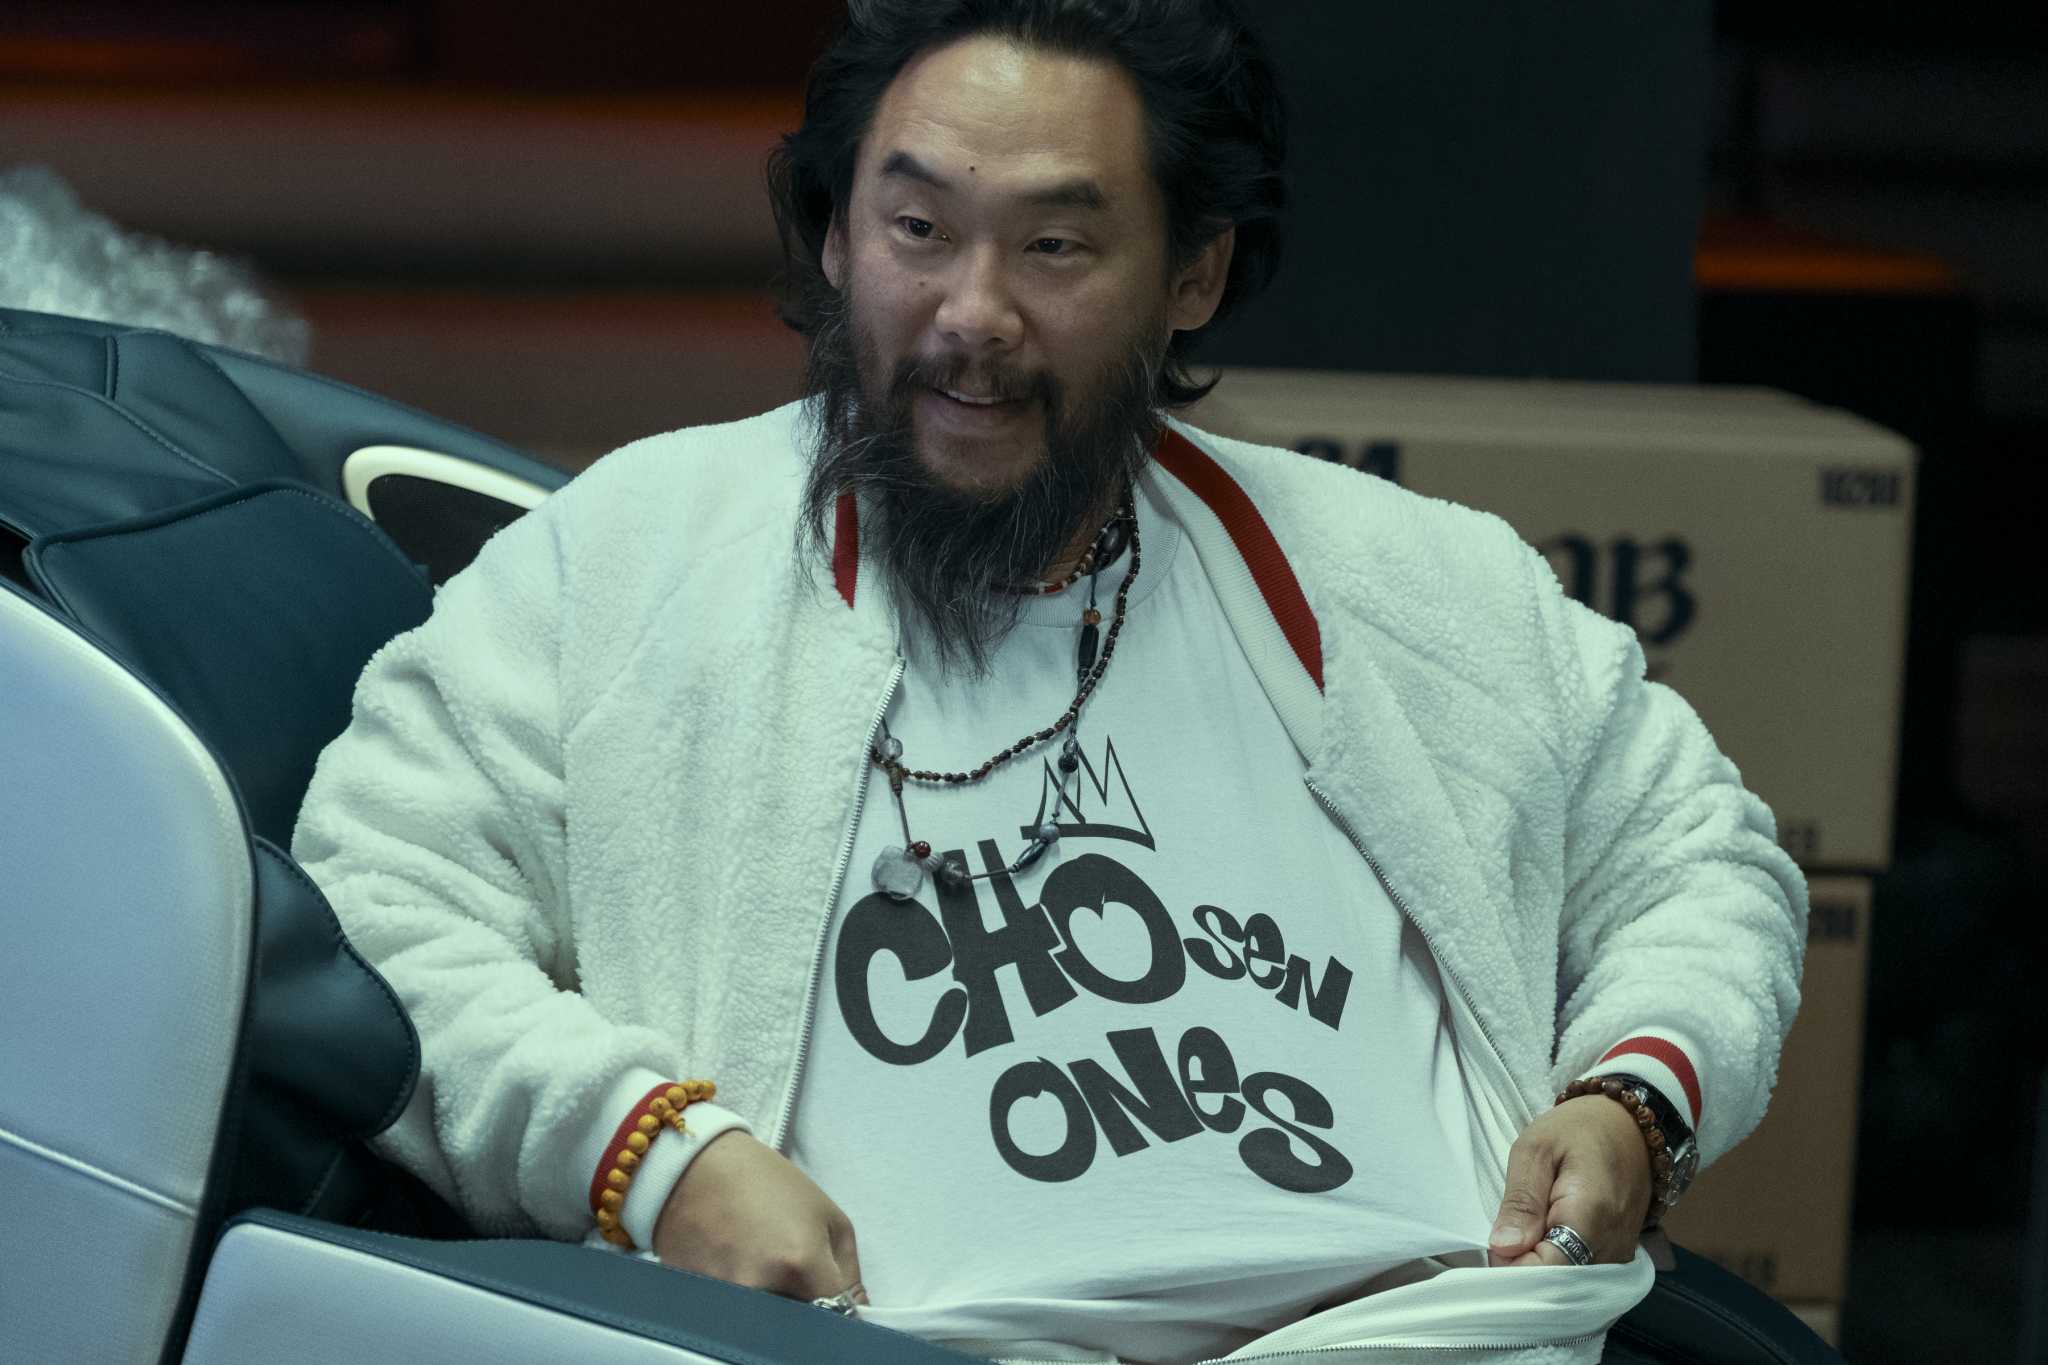 2014 Video surfaces of David Choe star of Netflix's BEEF admitting